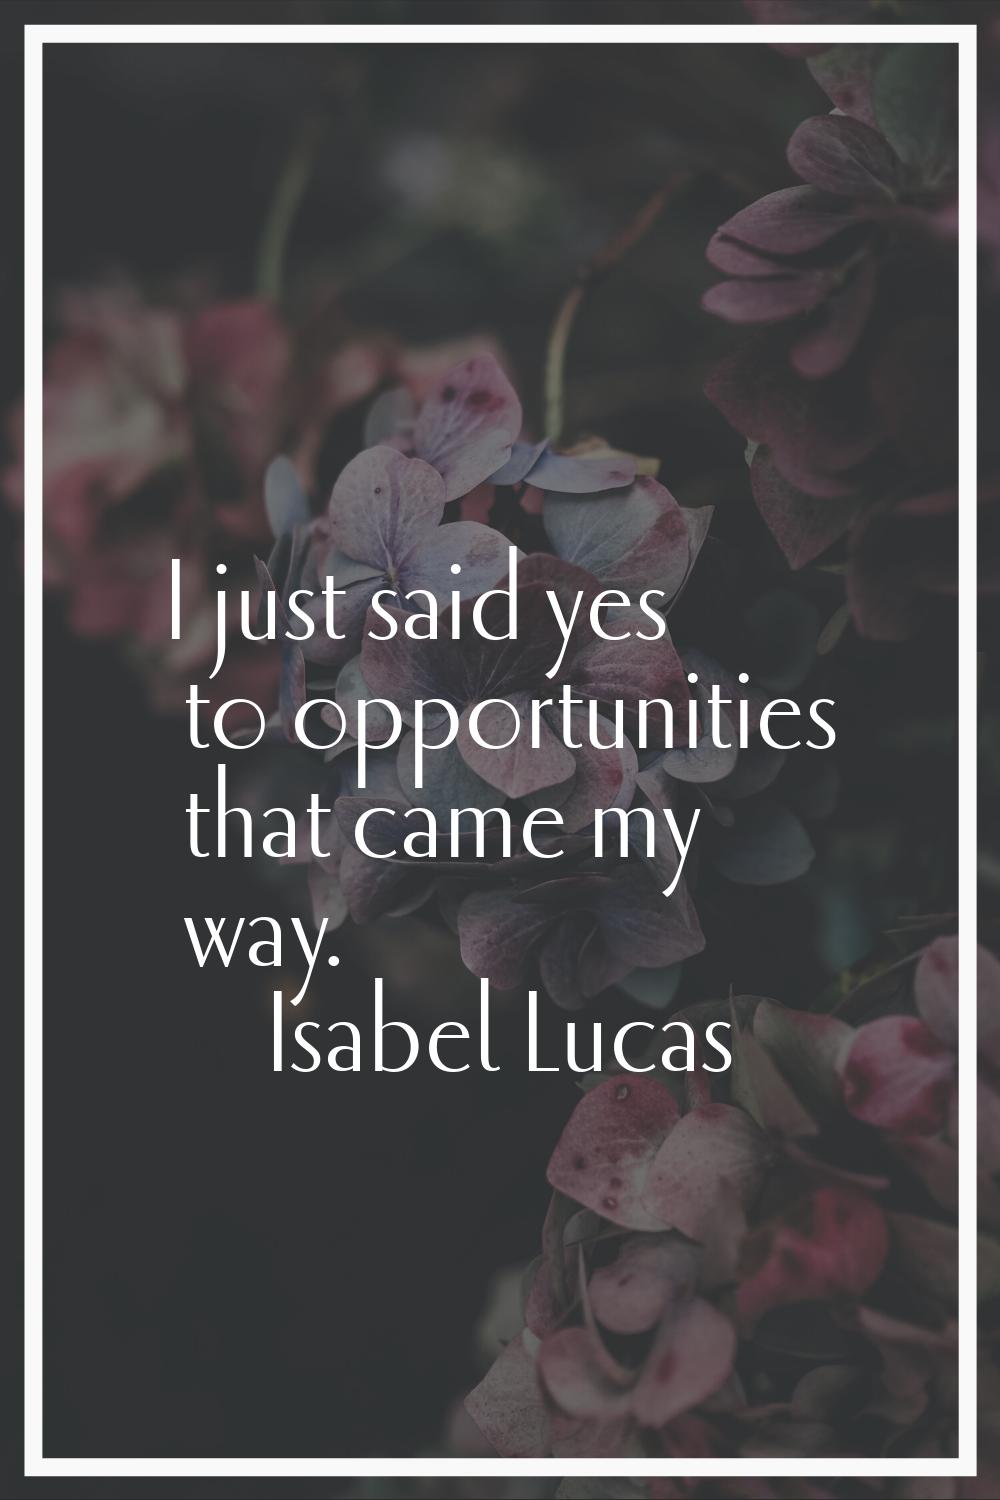 I just said yes to opportunities that came my way.